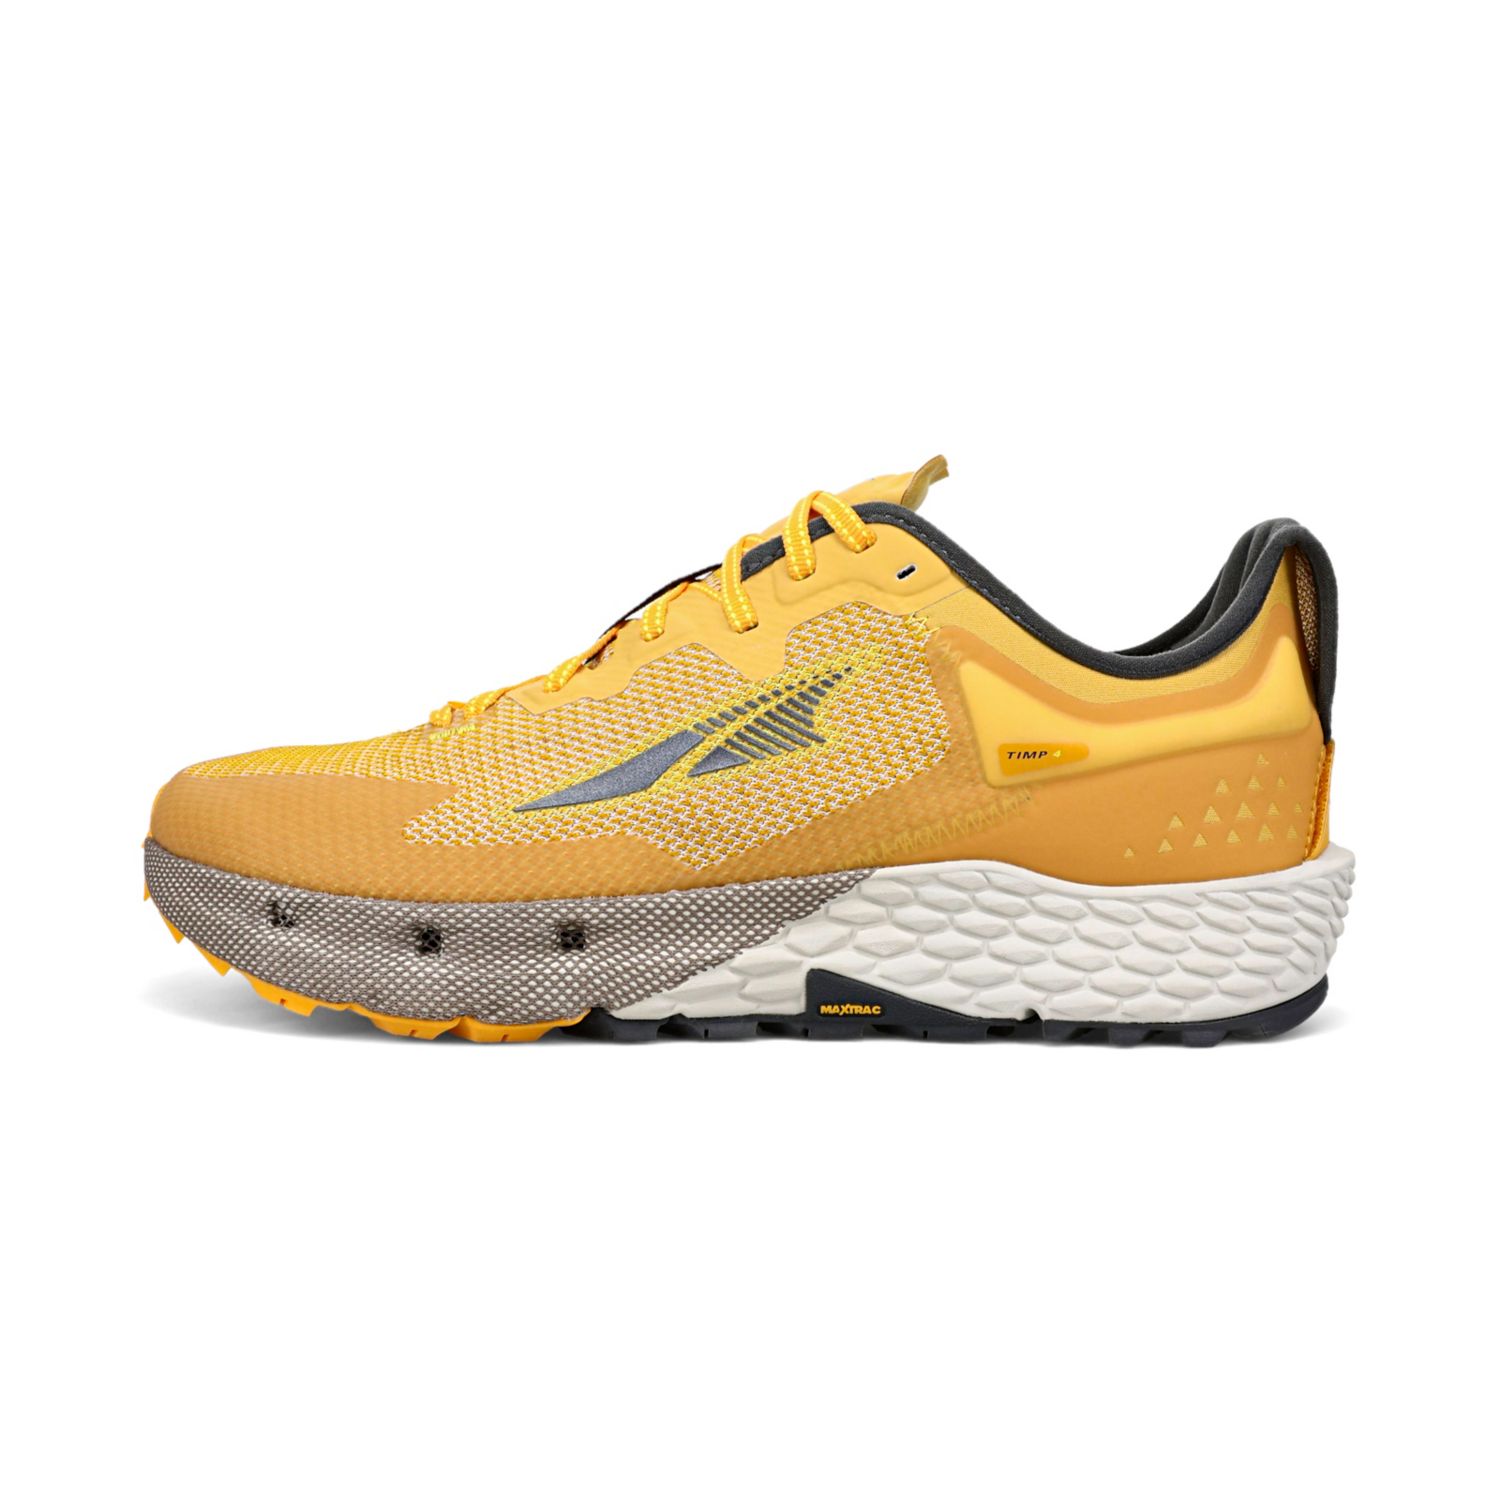 Altra Timp 4 Men's Trail Running Shoes Grey / Yellow | South Africa-21653879